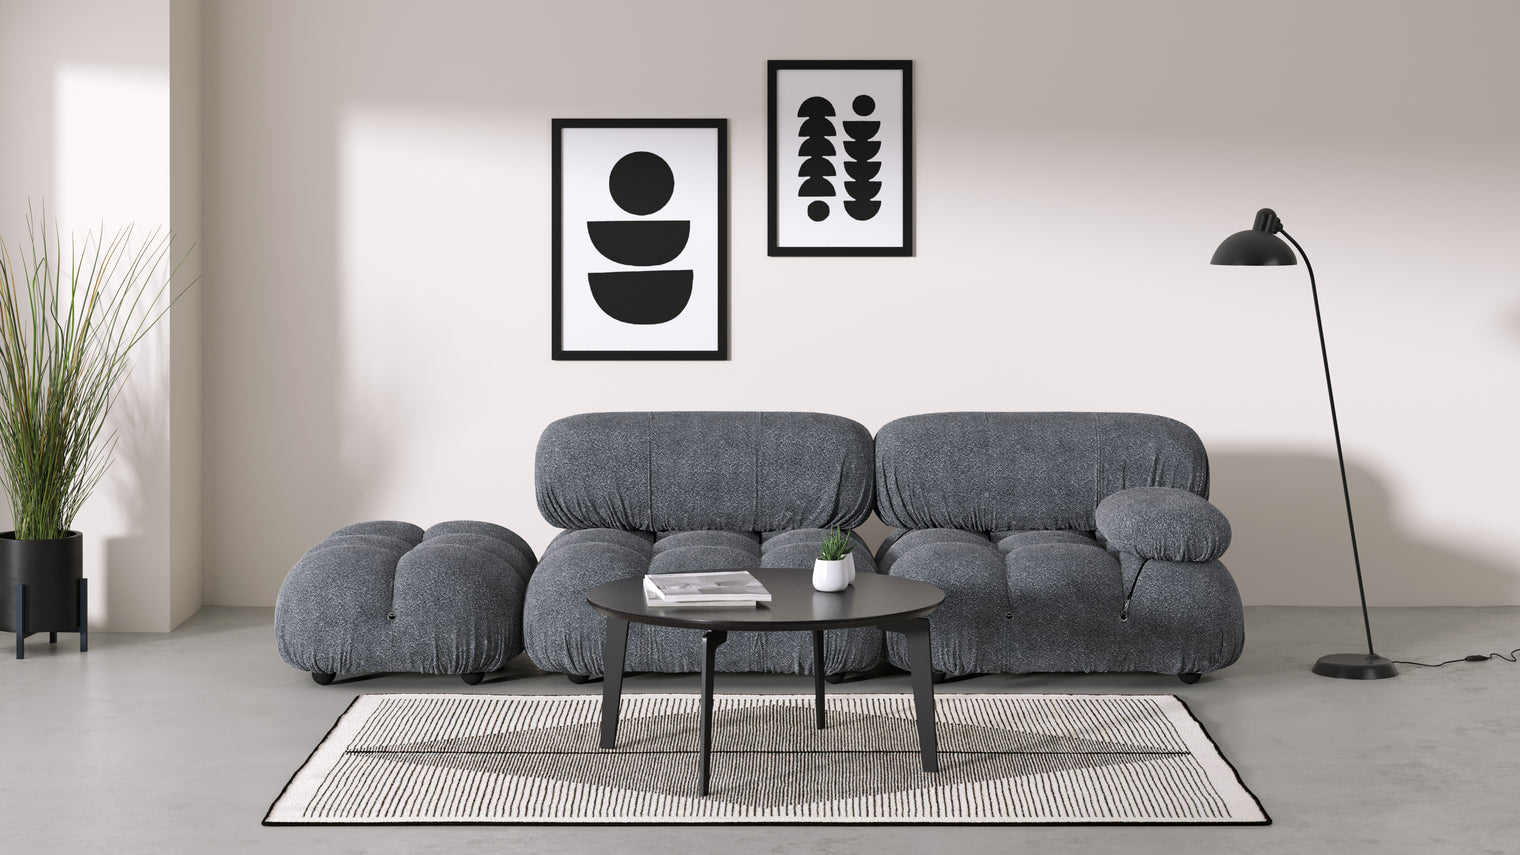 Stylish Sectional|With the Belia’s sectional design, you can create a sofa that suits your space. The soft curves of each carefully crafted cushion create a luxurious and comfortable seat for the ultimate in stylish comfort.
